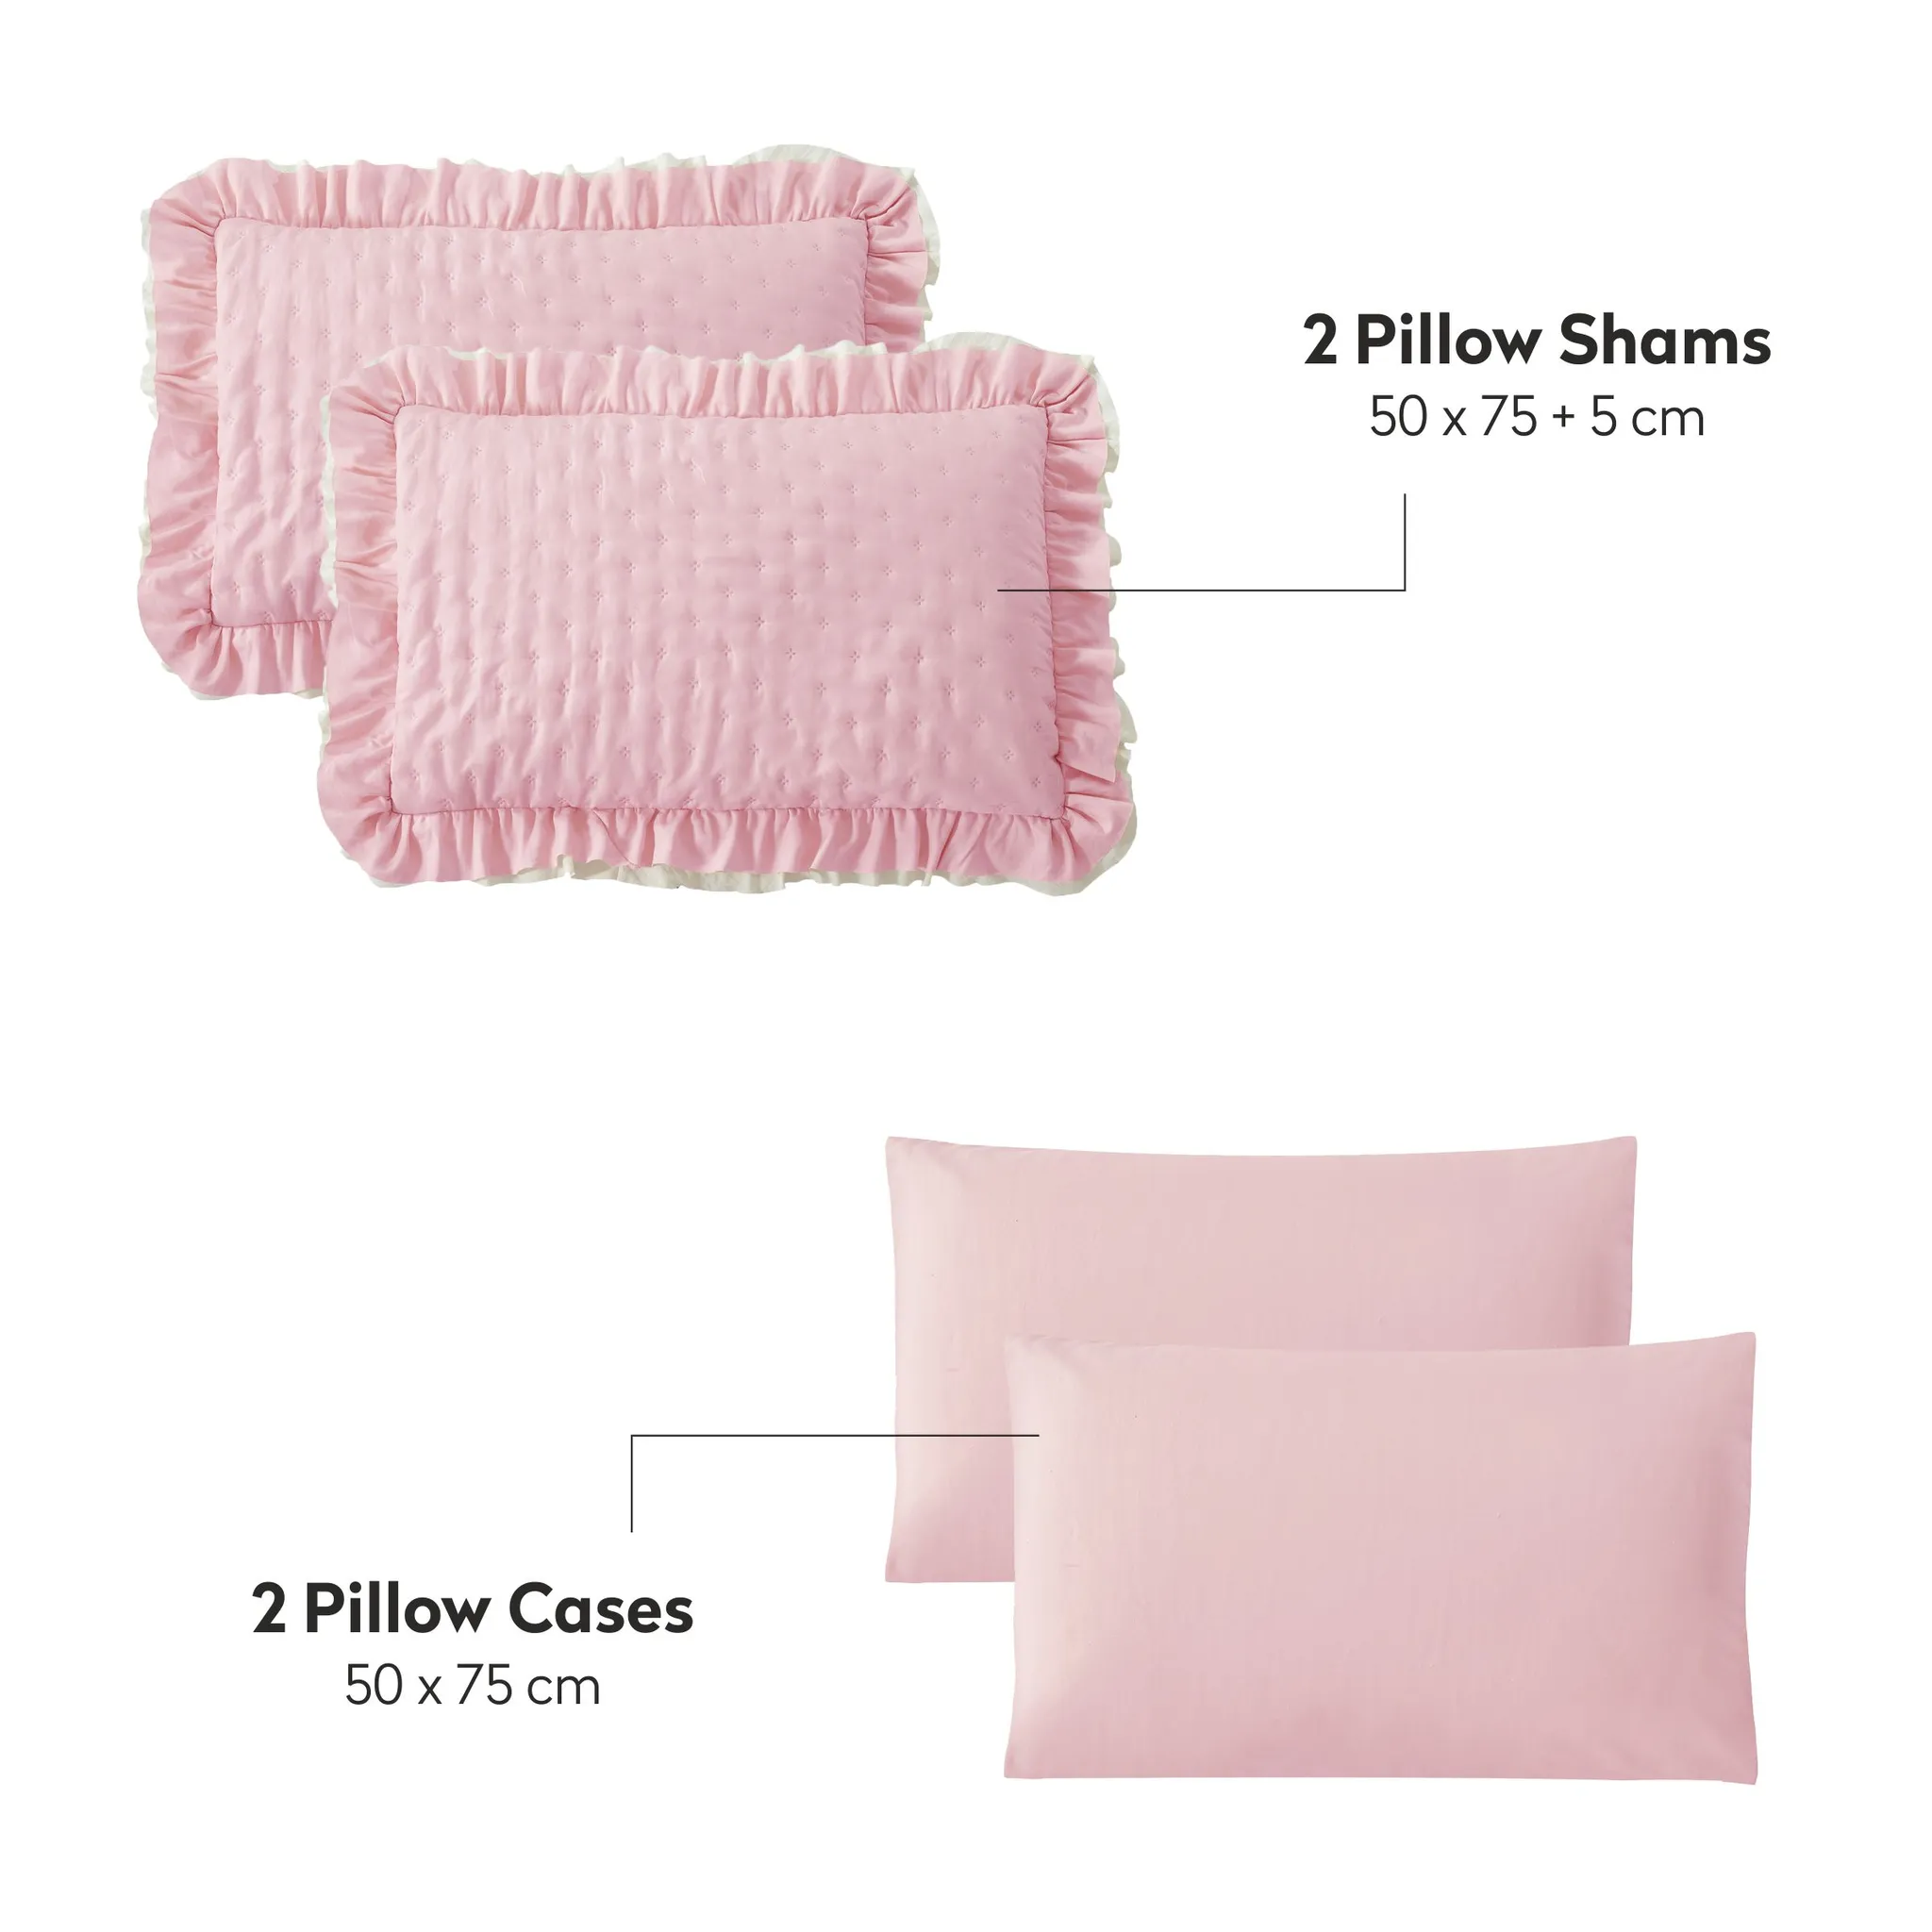 Ruffled Lace Ultrasonic Embroidered Comforter Set 6-Piece King Pink